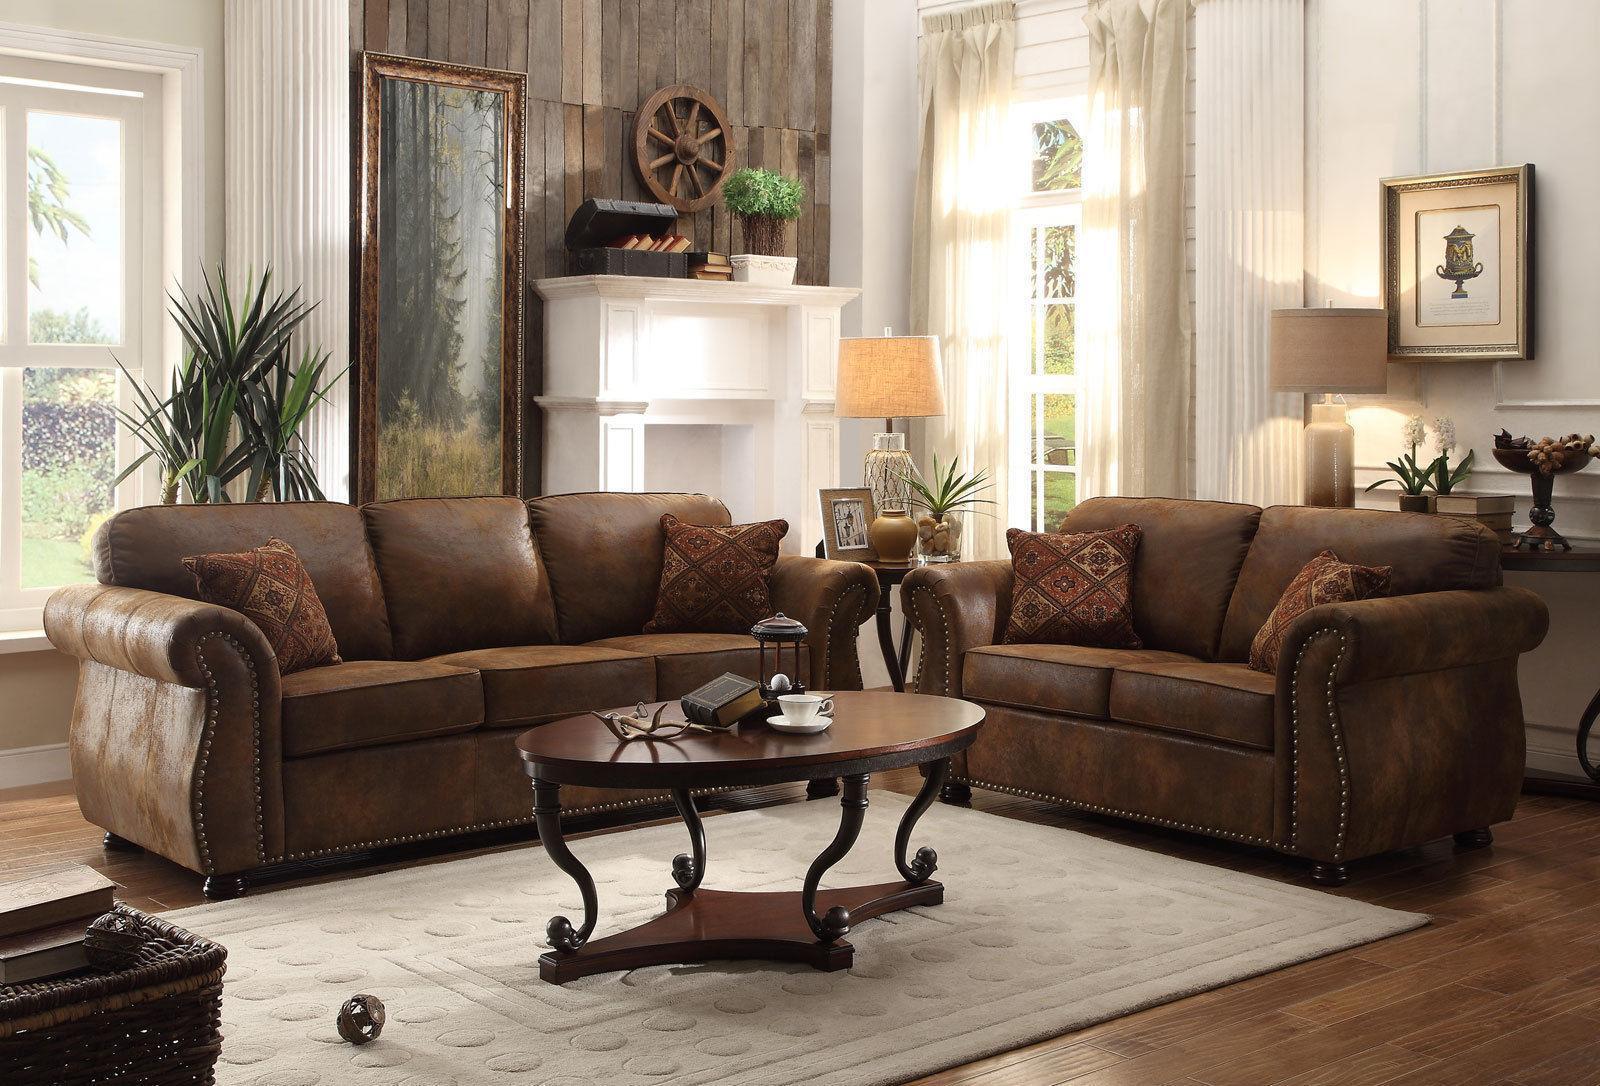 Rustic Living Room Teal Couch And Loveseat